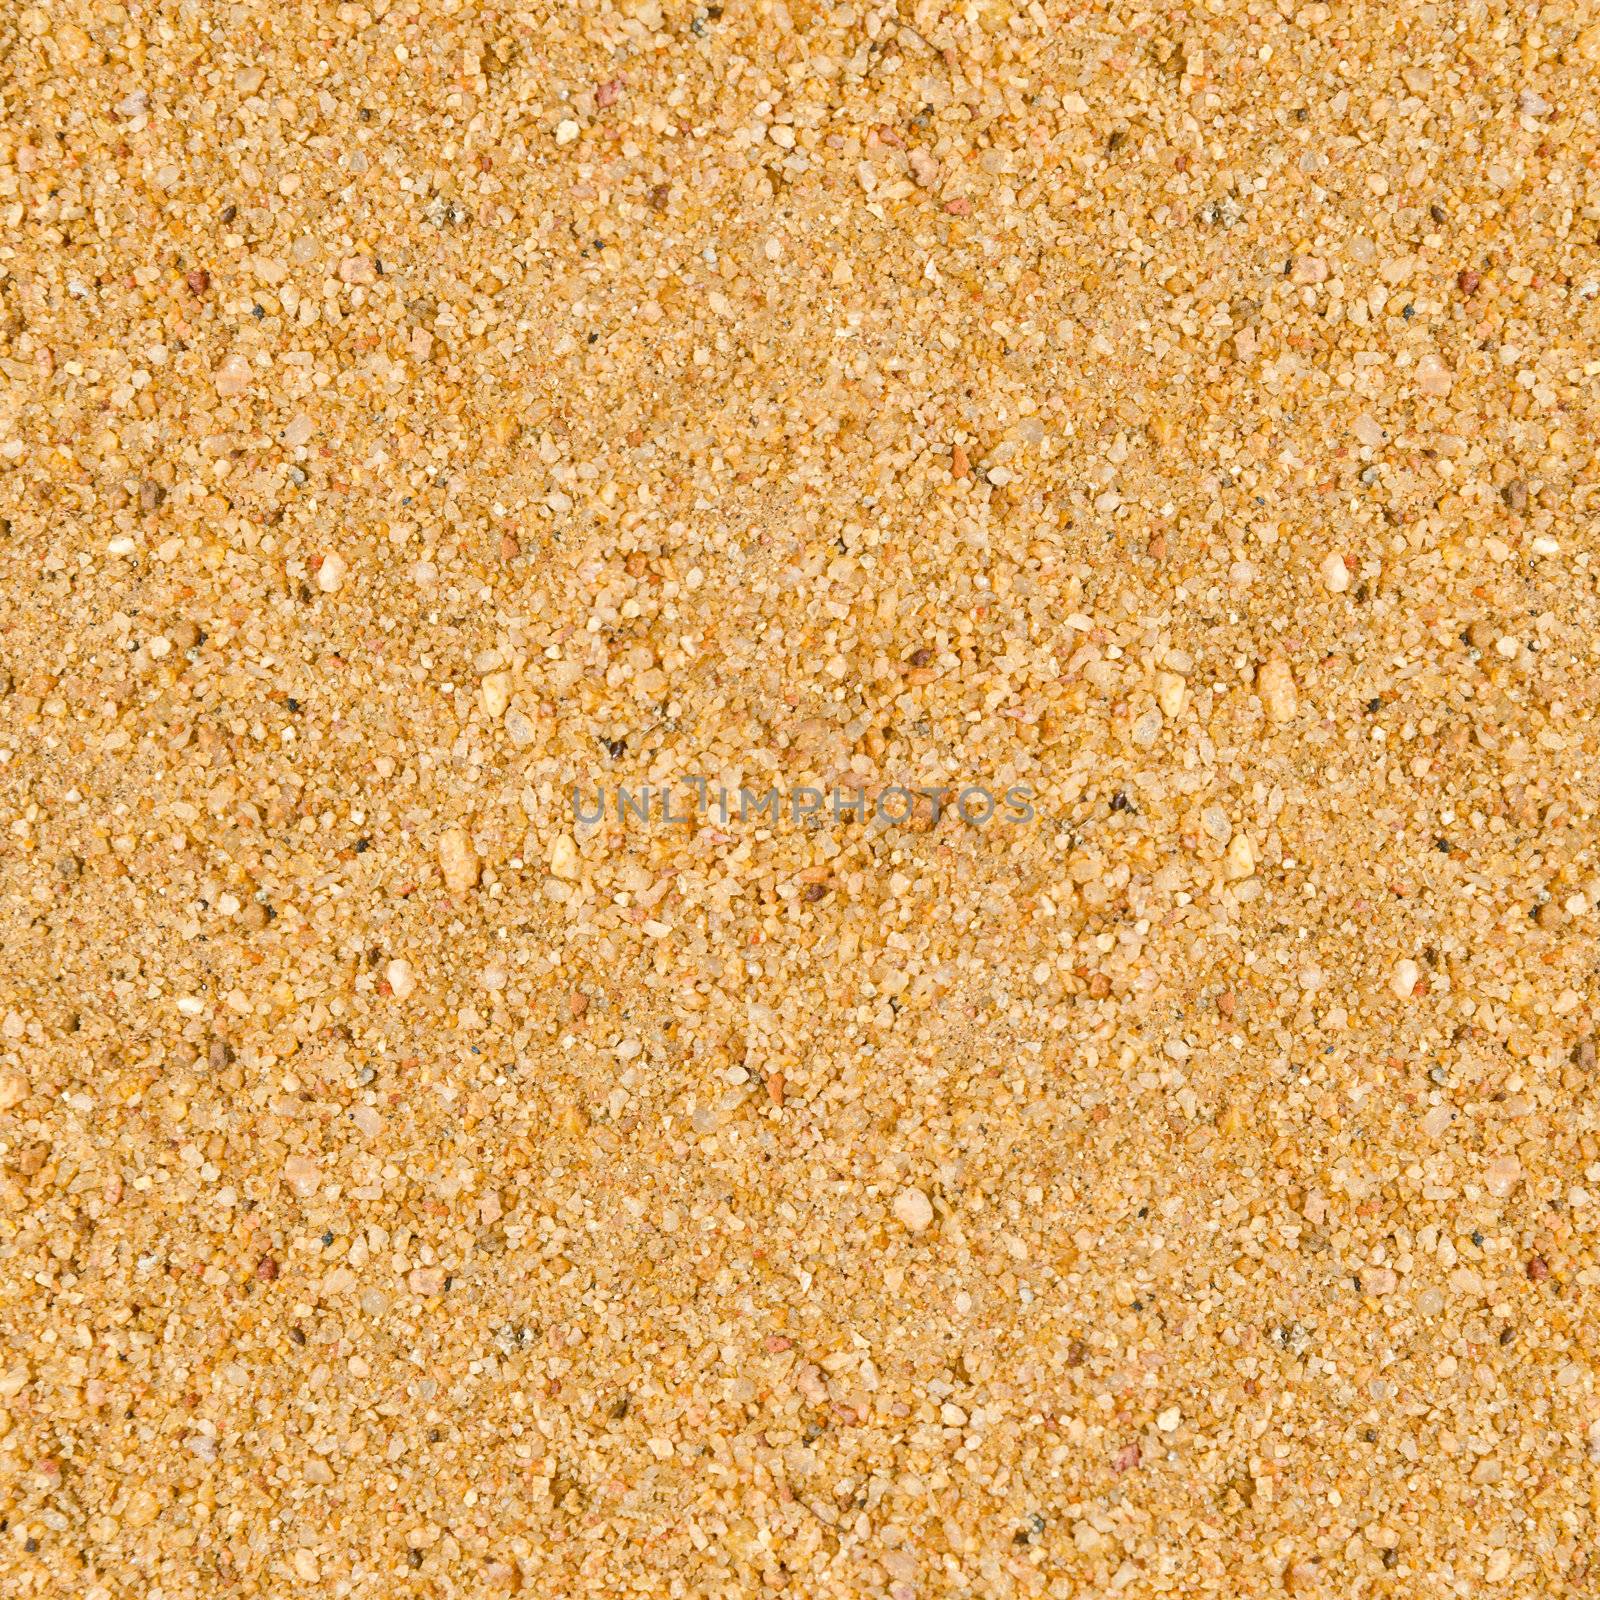 coarse-grained beach sand is very close as a background